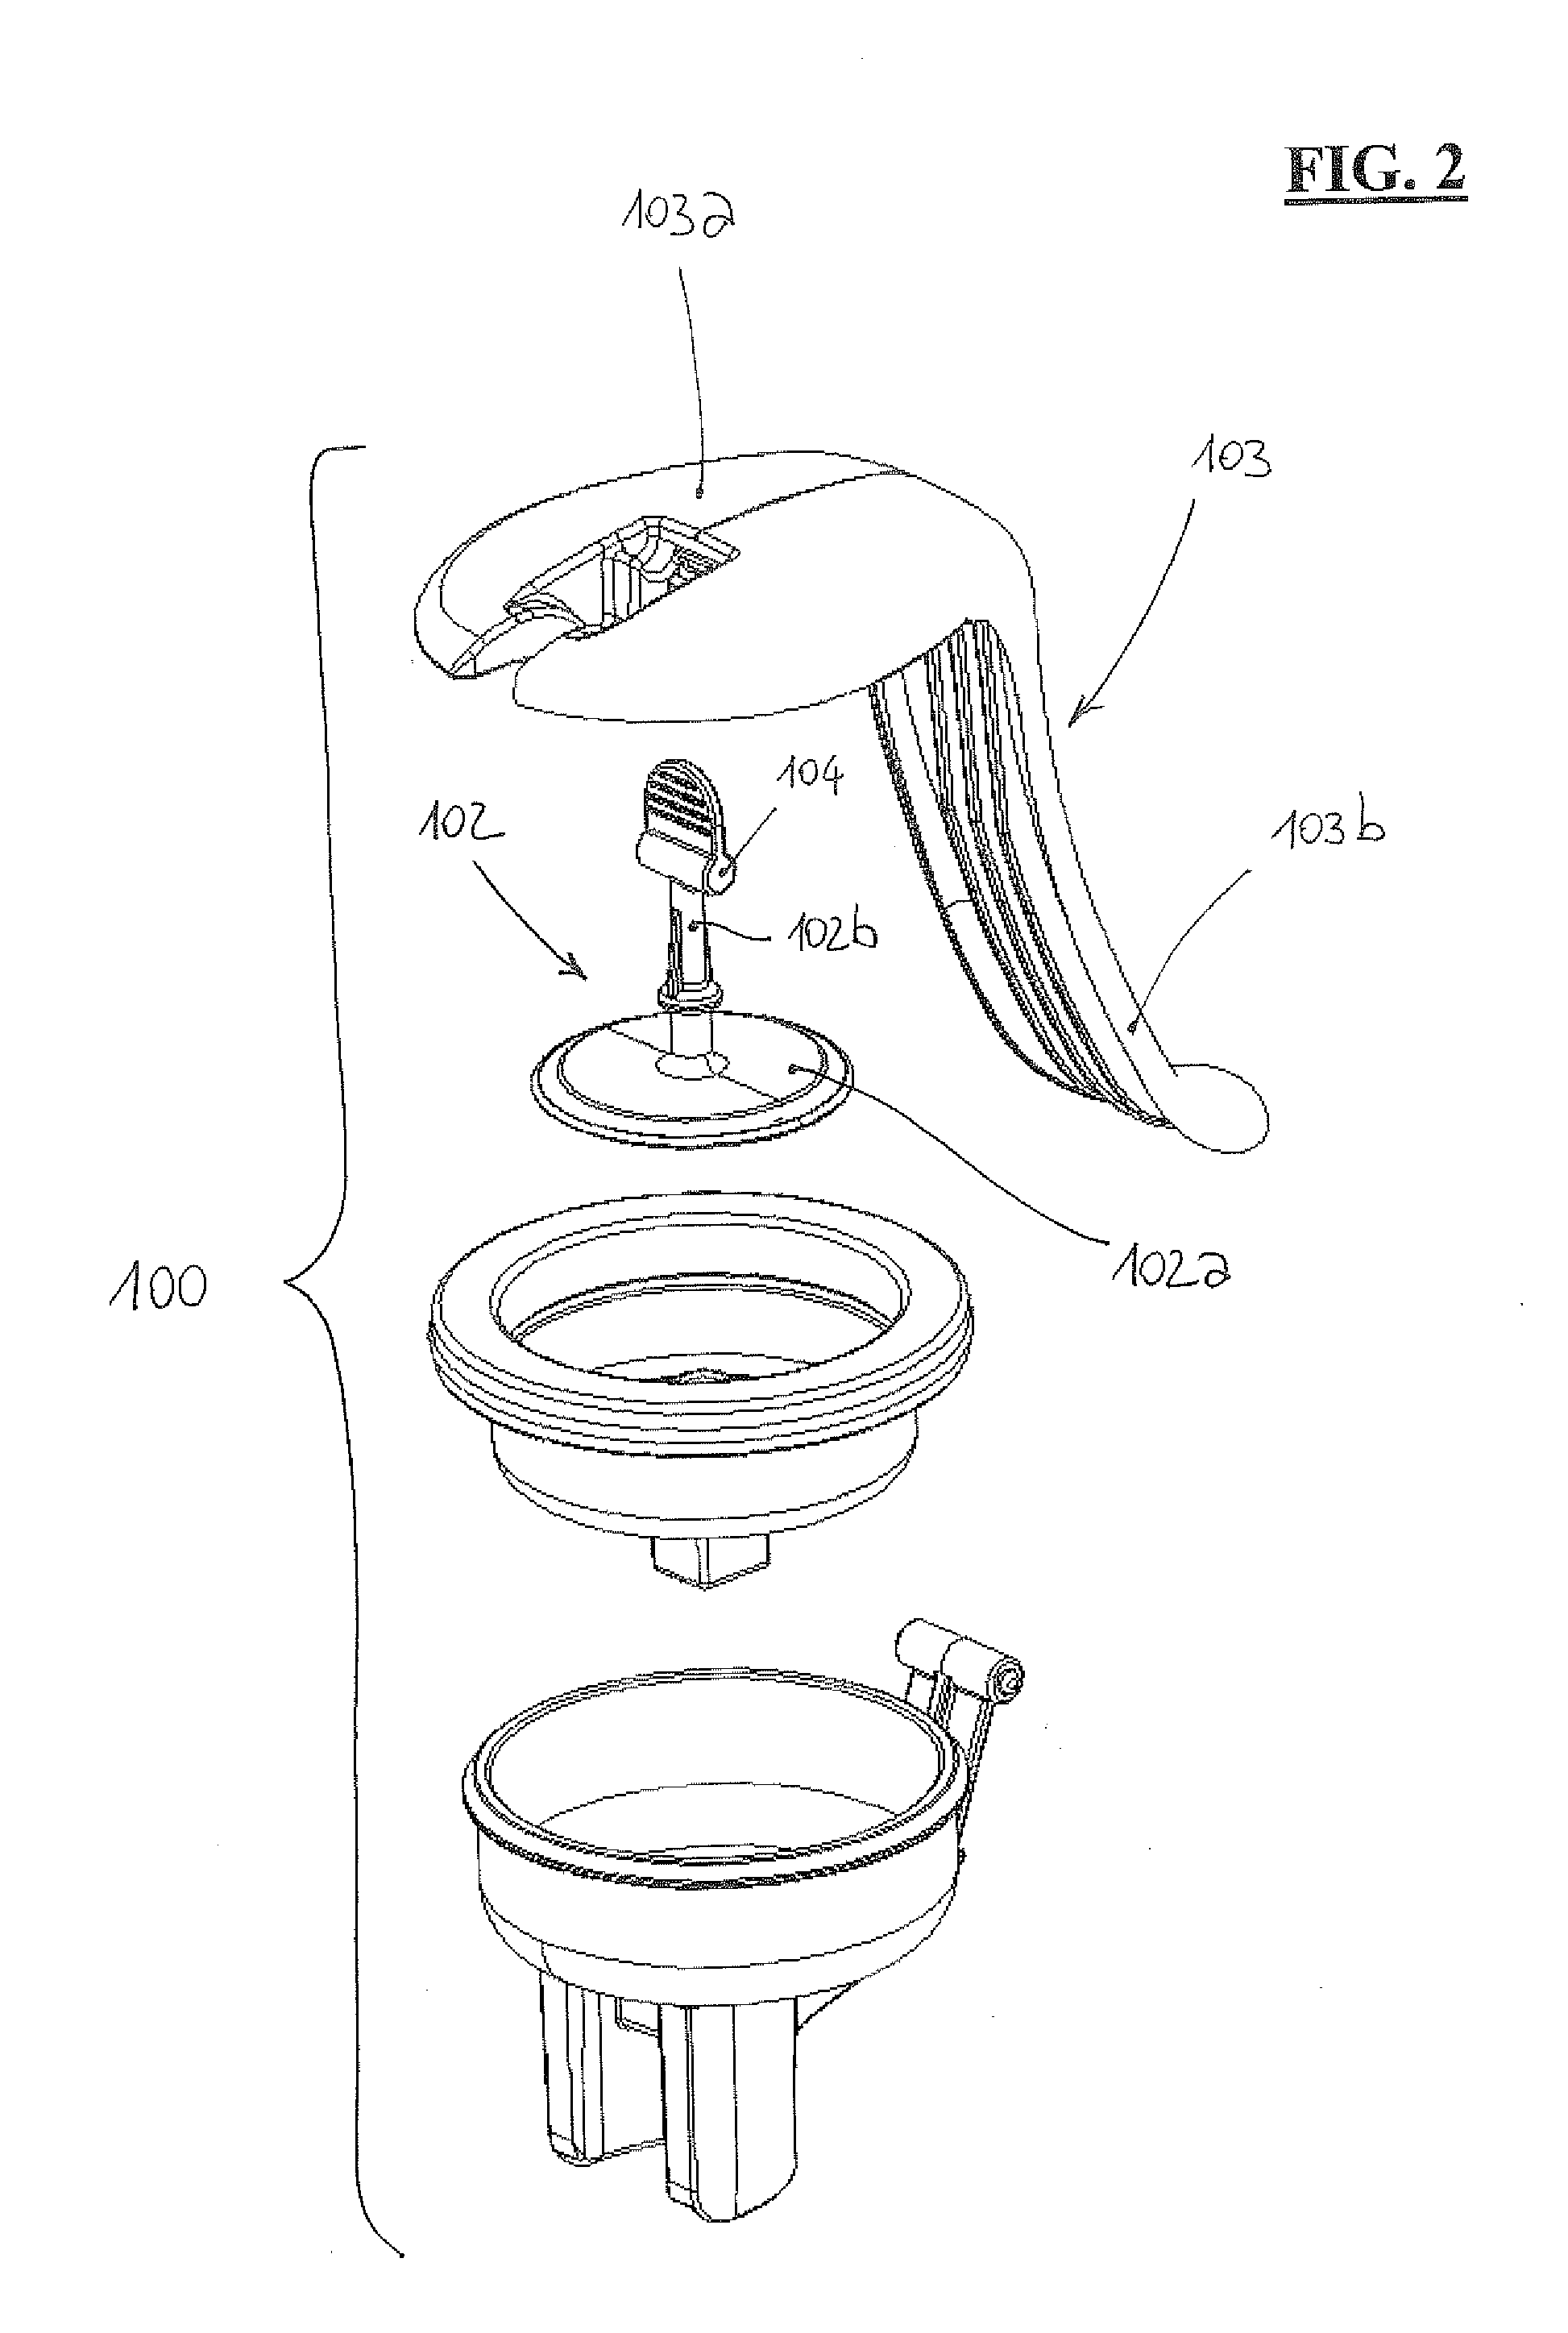 Apparatus for extracting milk from a breast and related pump unit